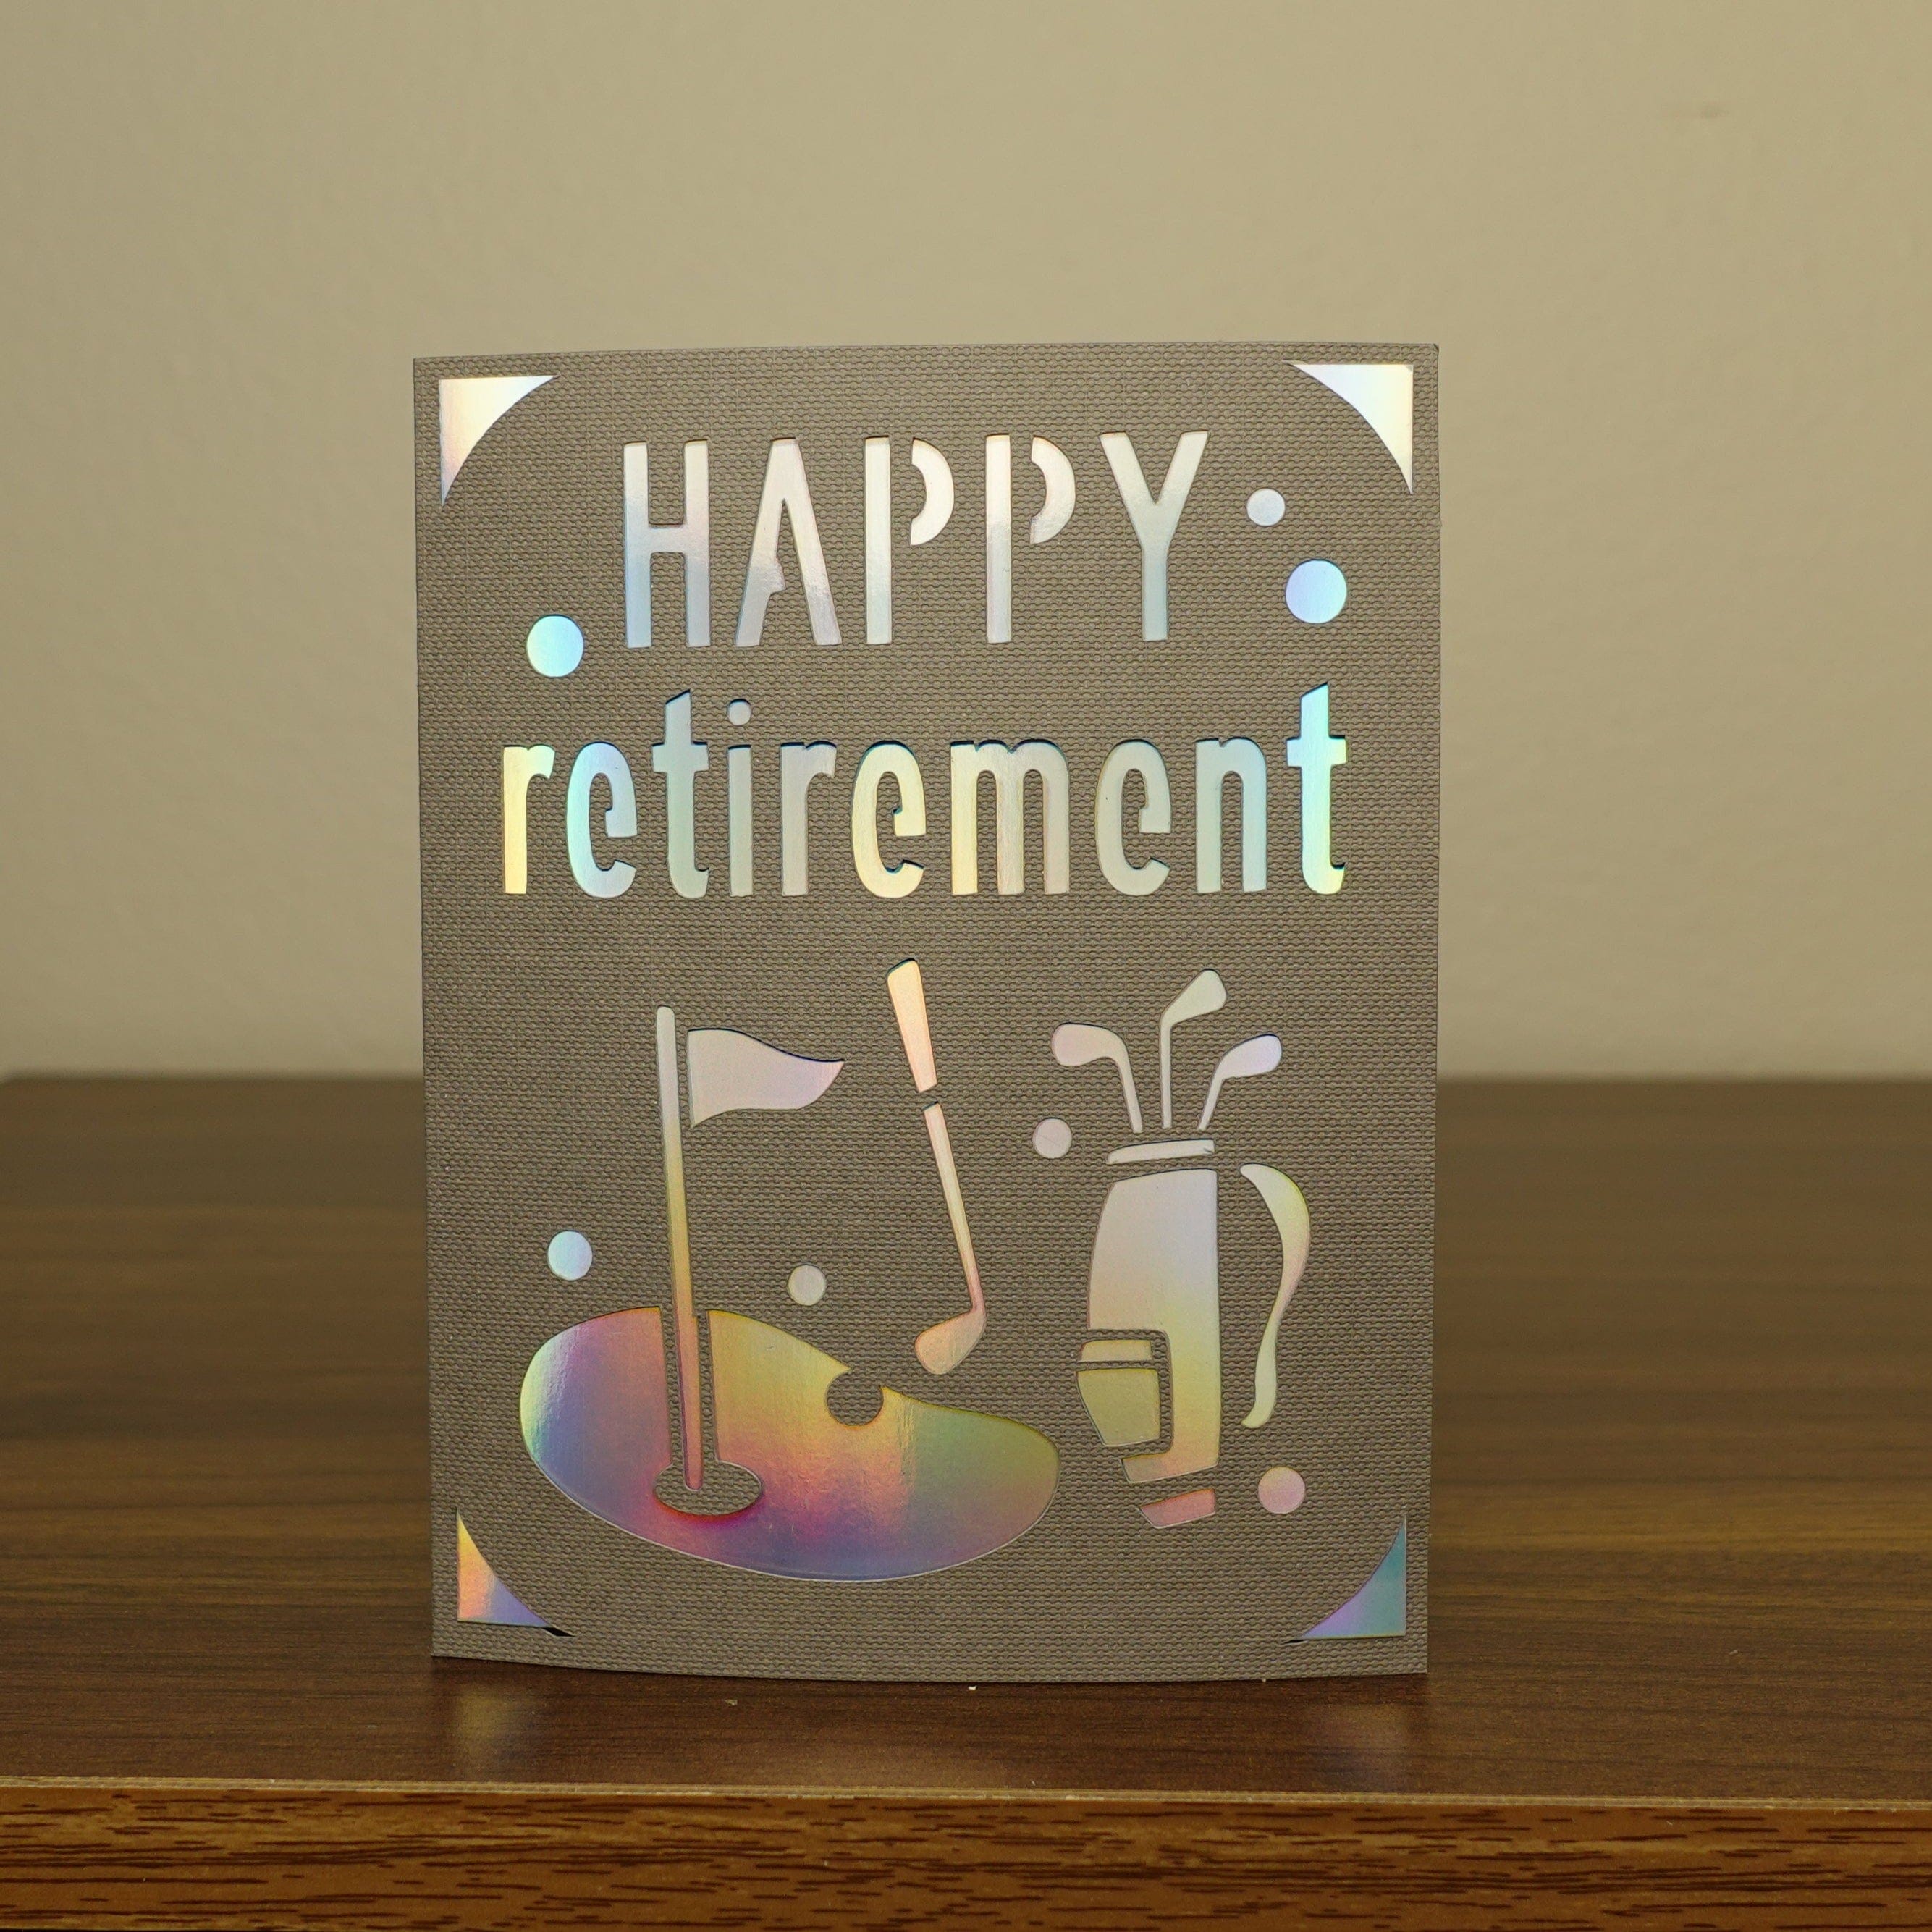 card on table that says happy retirement